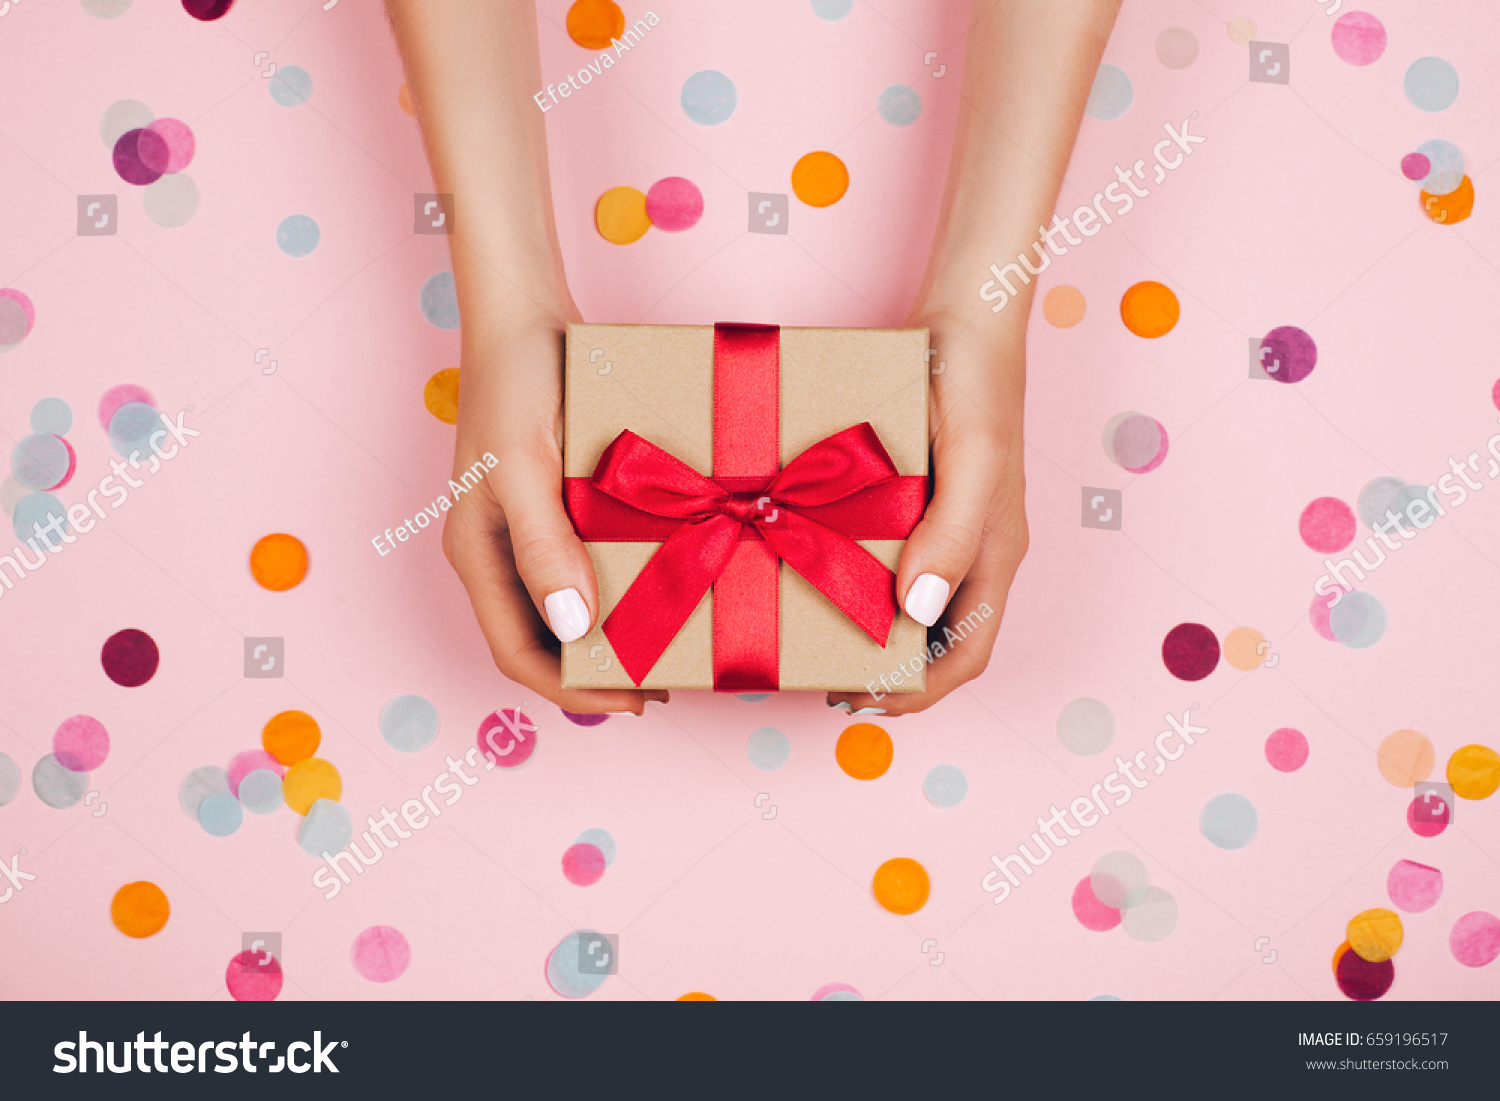 Woman hands holding present box with red bow on pastel pink background with multicolored confetti. Flat lay style. #659196517